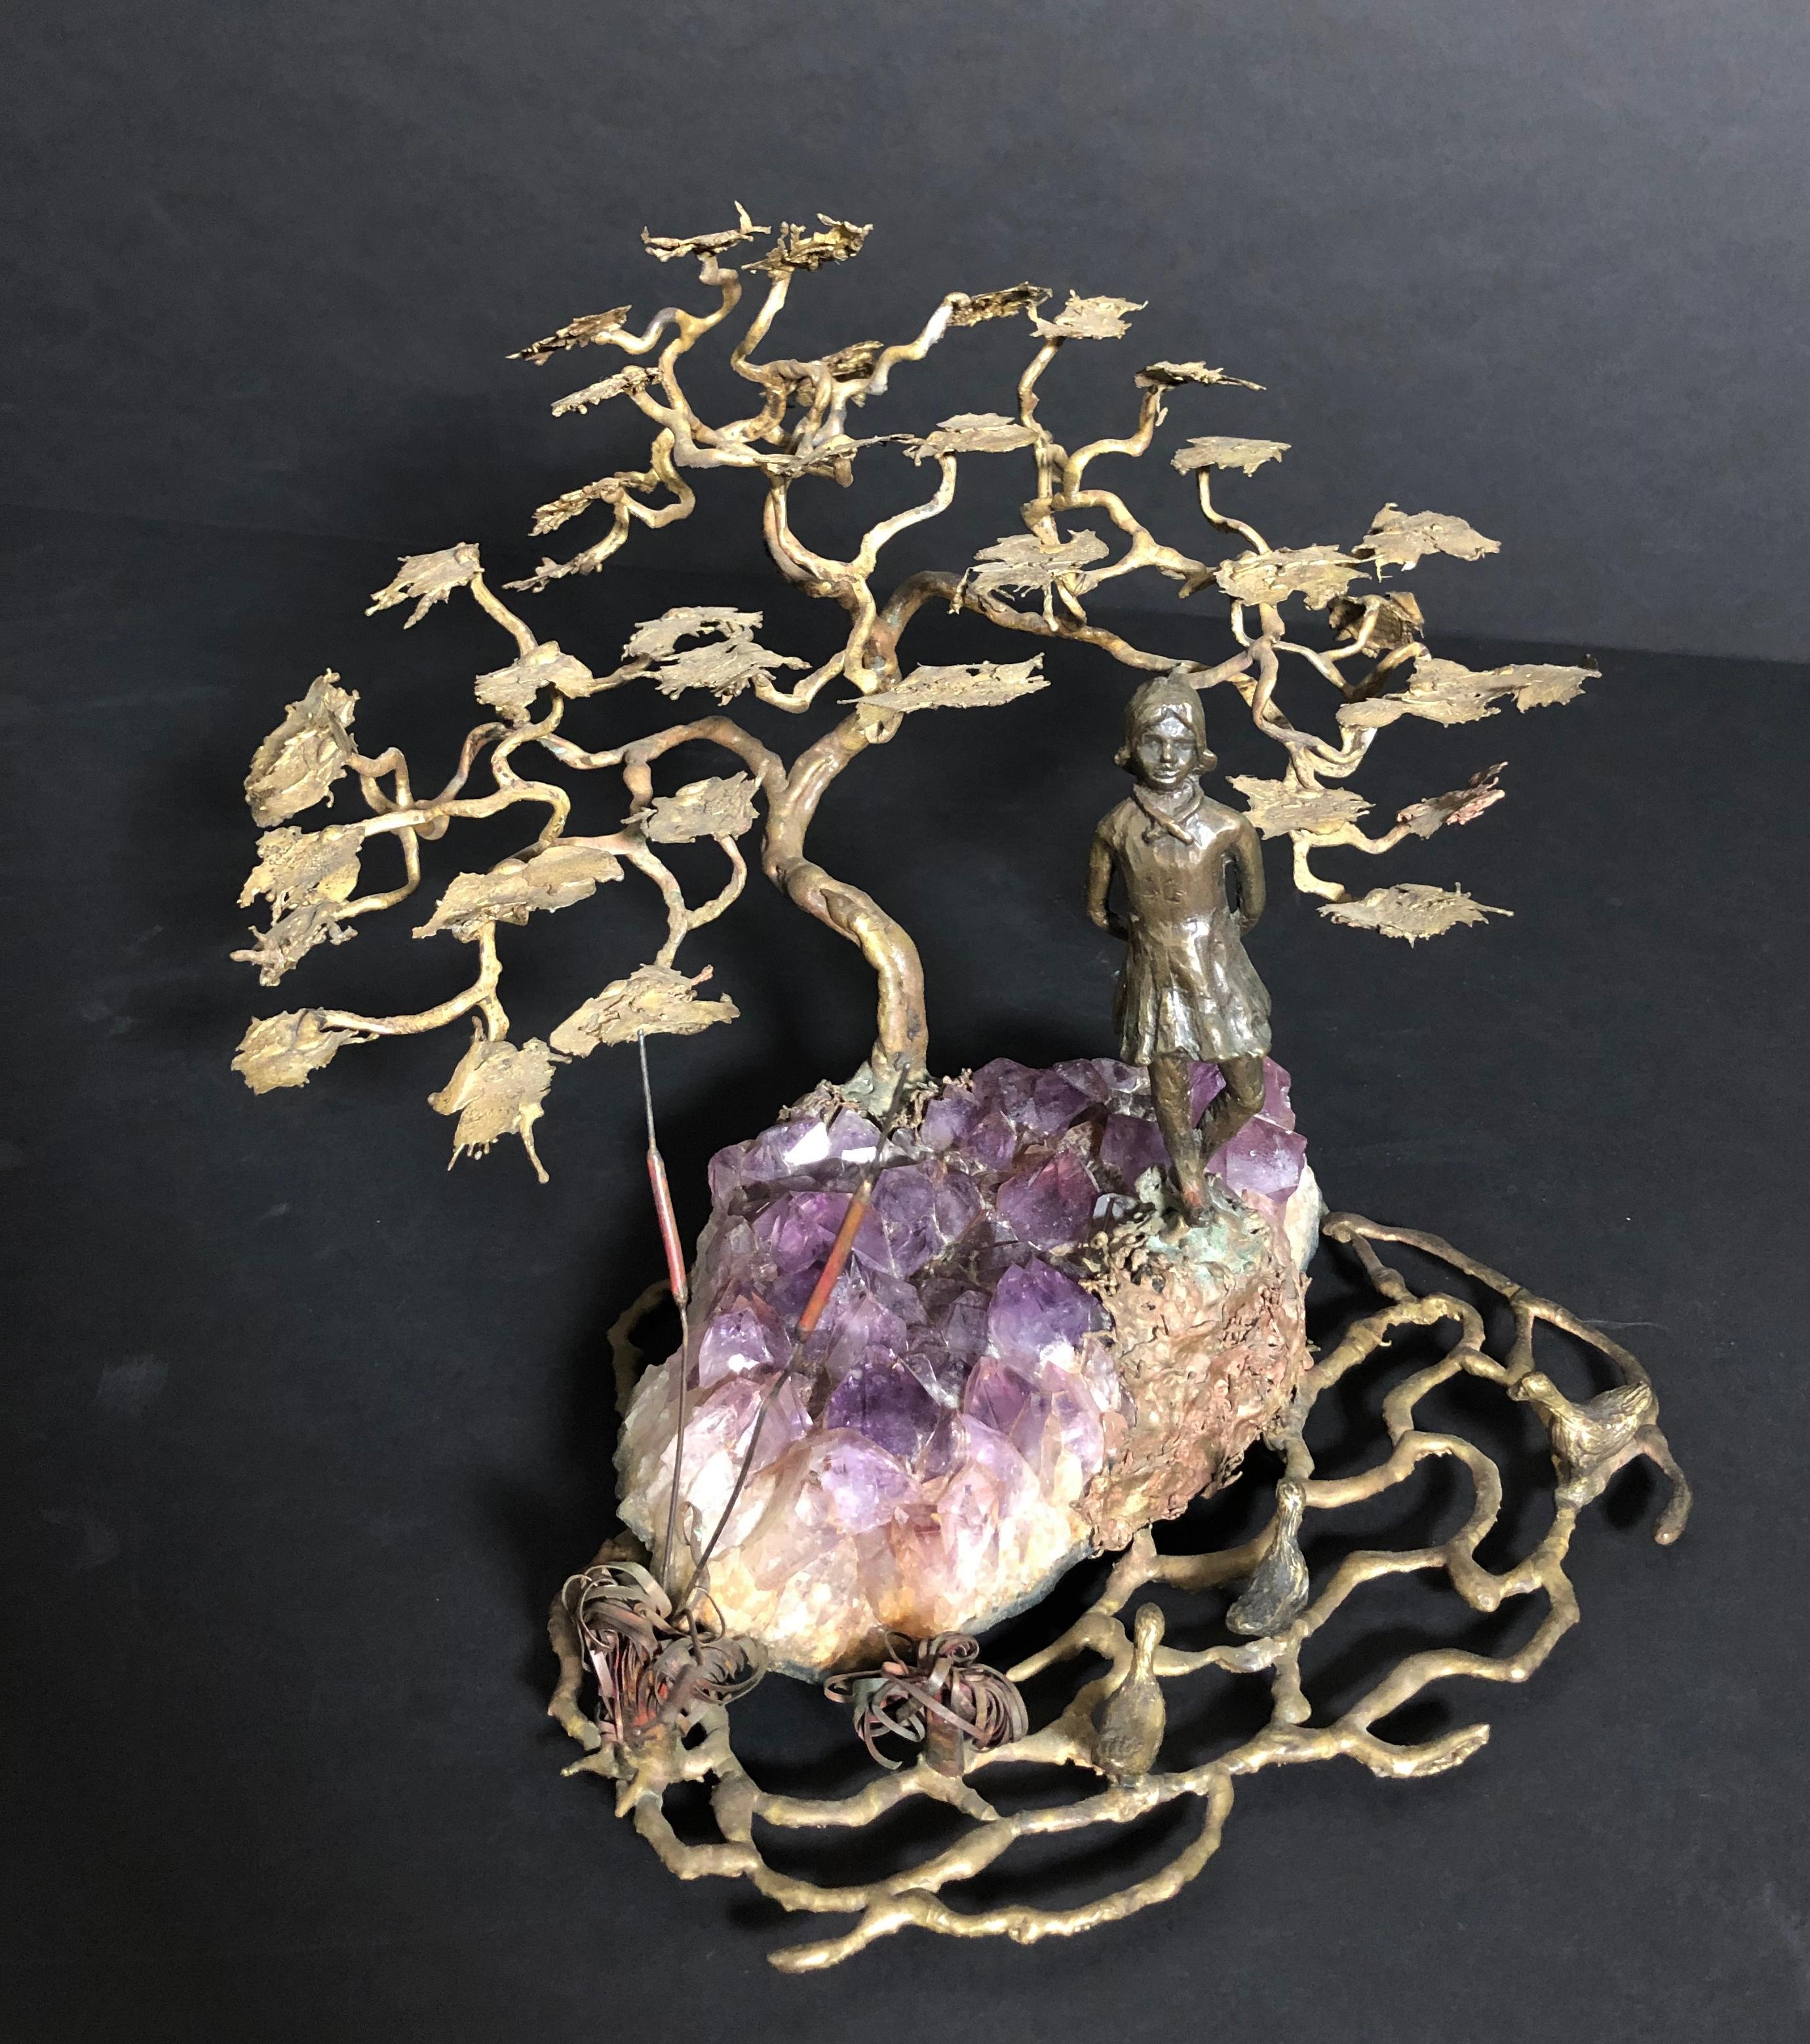 Ron Bertocchi bronze sculpture of a young girl standing, mounted on a natural amethyst stone ground at the edge of pond with ducks and reeds, covered by a stylized sprawling tree. Lacking signature plaque.